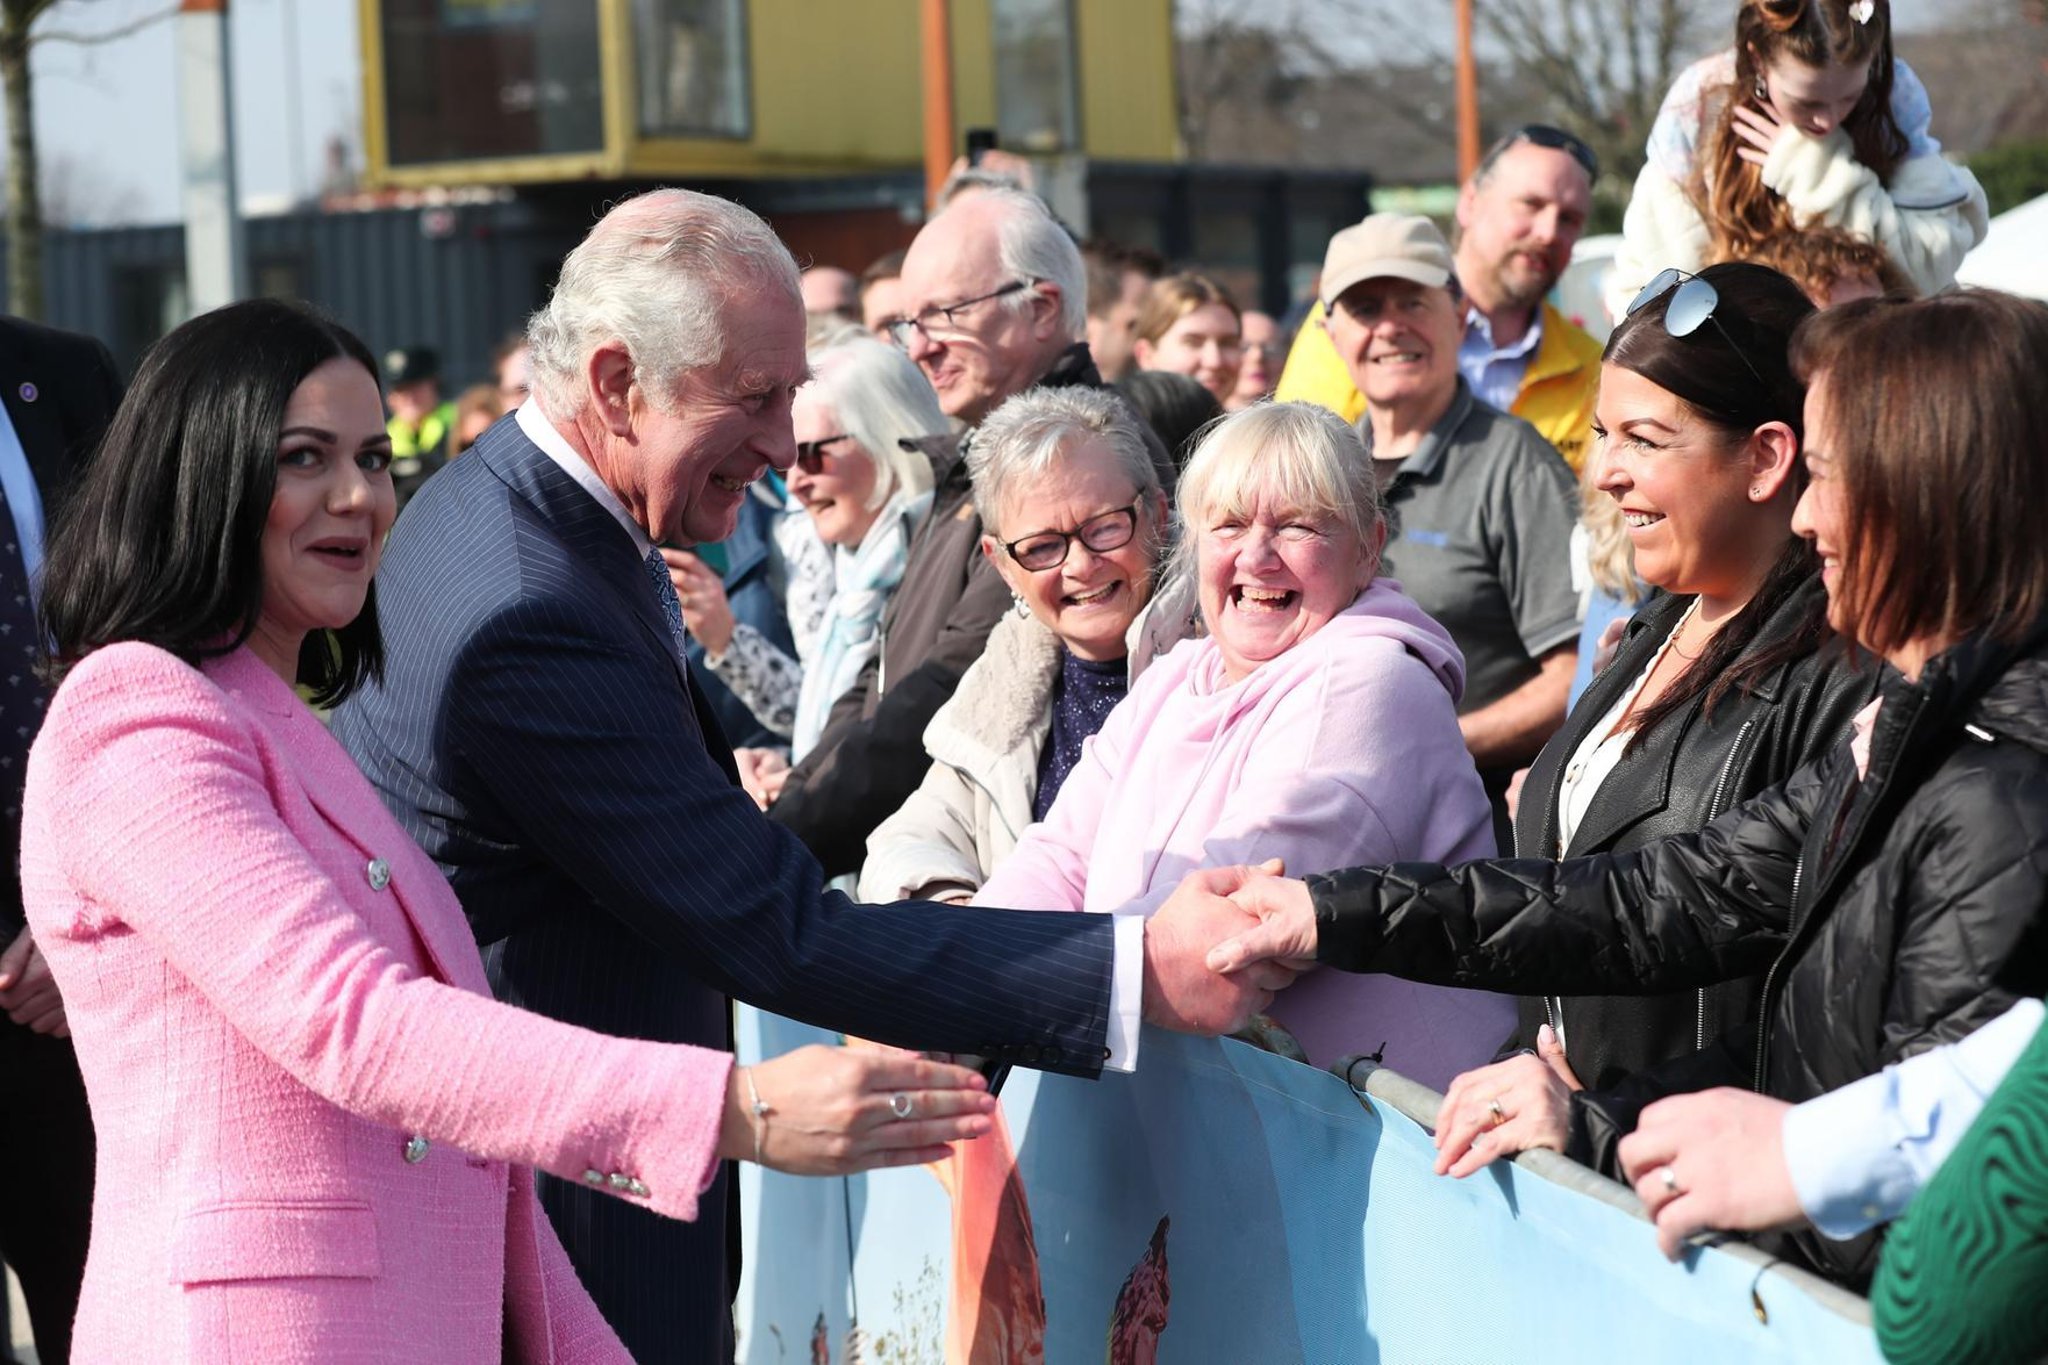 PICTURES: Here are 20 images of Charles and Camilla in Belfast